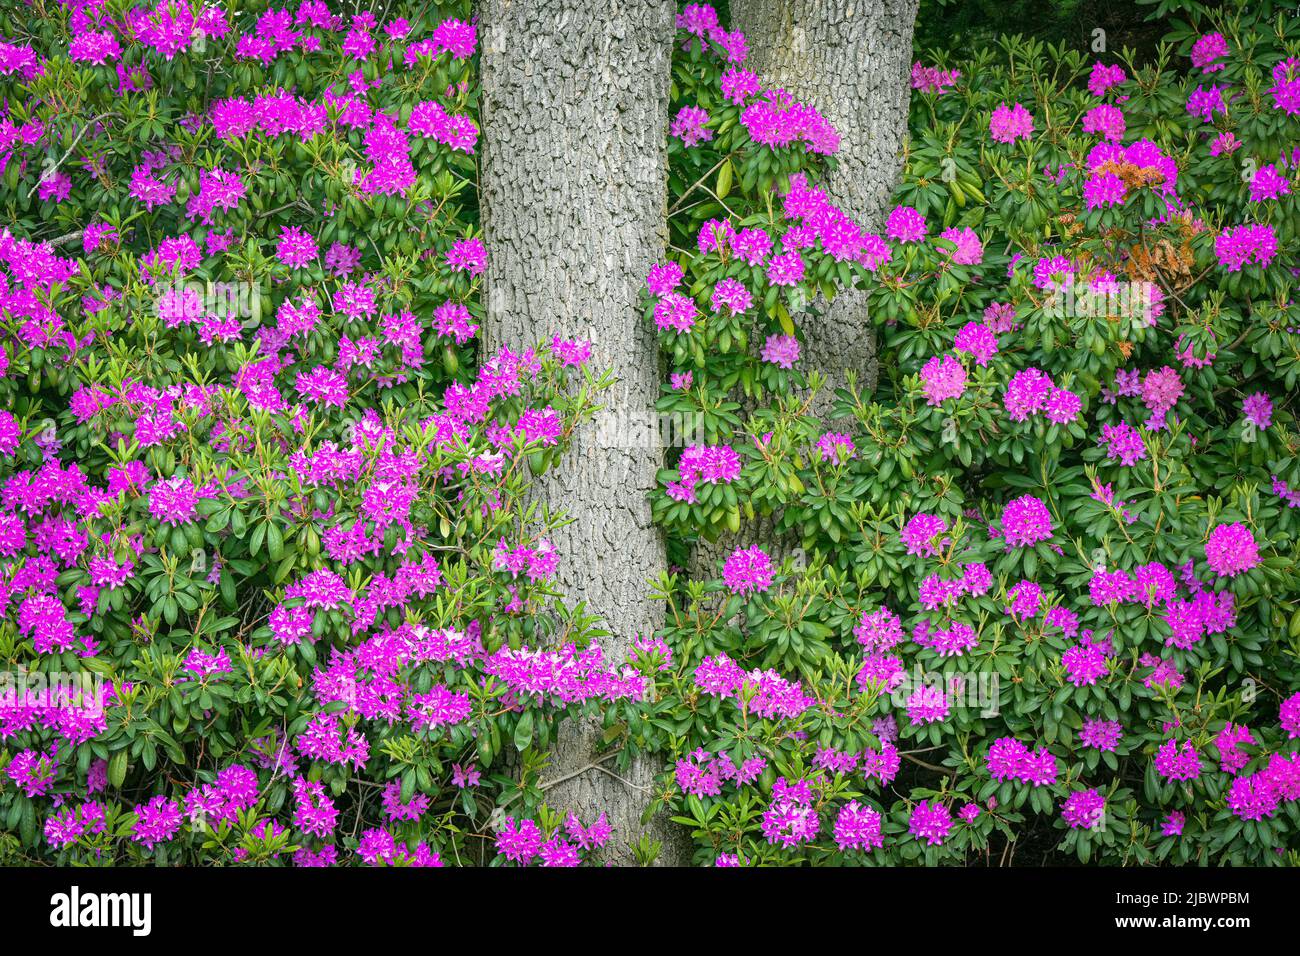 Pink Rhododendron flowers, Government House,  Victoria, British Columbia, Canada Stock Photo